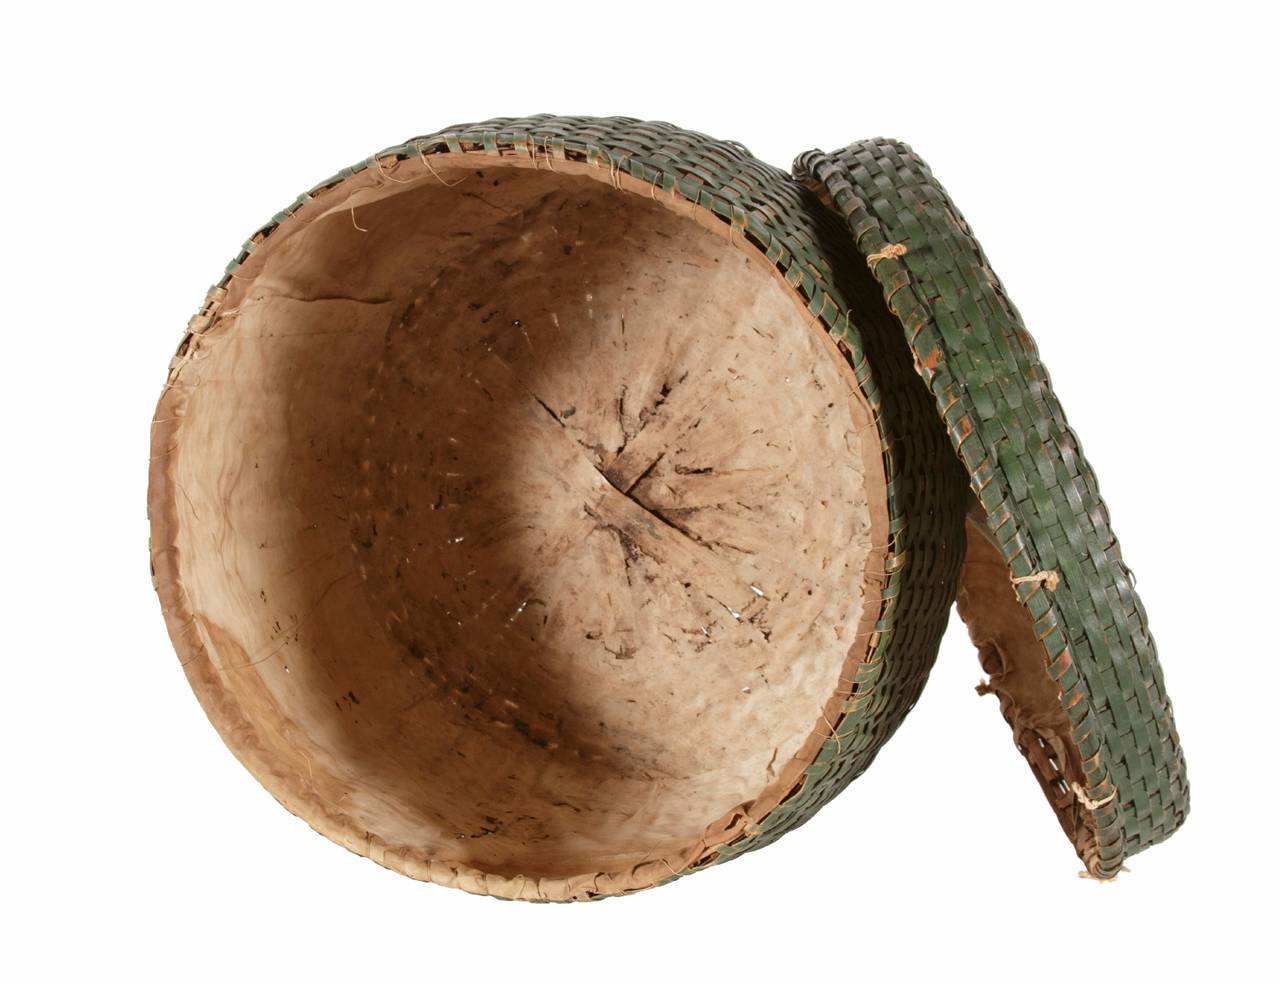 Lidded and lined splint basket in green paint, last quarter of the 19th century:

Large splint basket with fitted, overlapping lid, lightweight and structurally akin to a feather basket, but wide-mouthed and relatively shallow in shape when